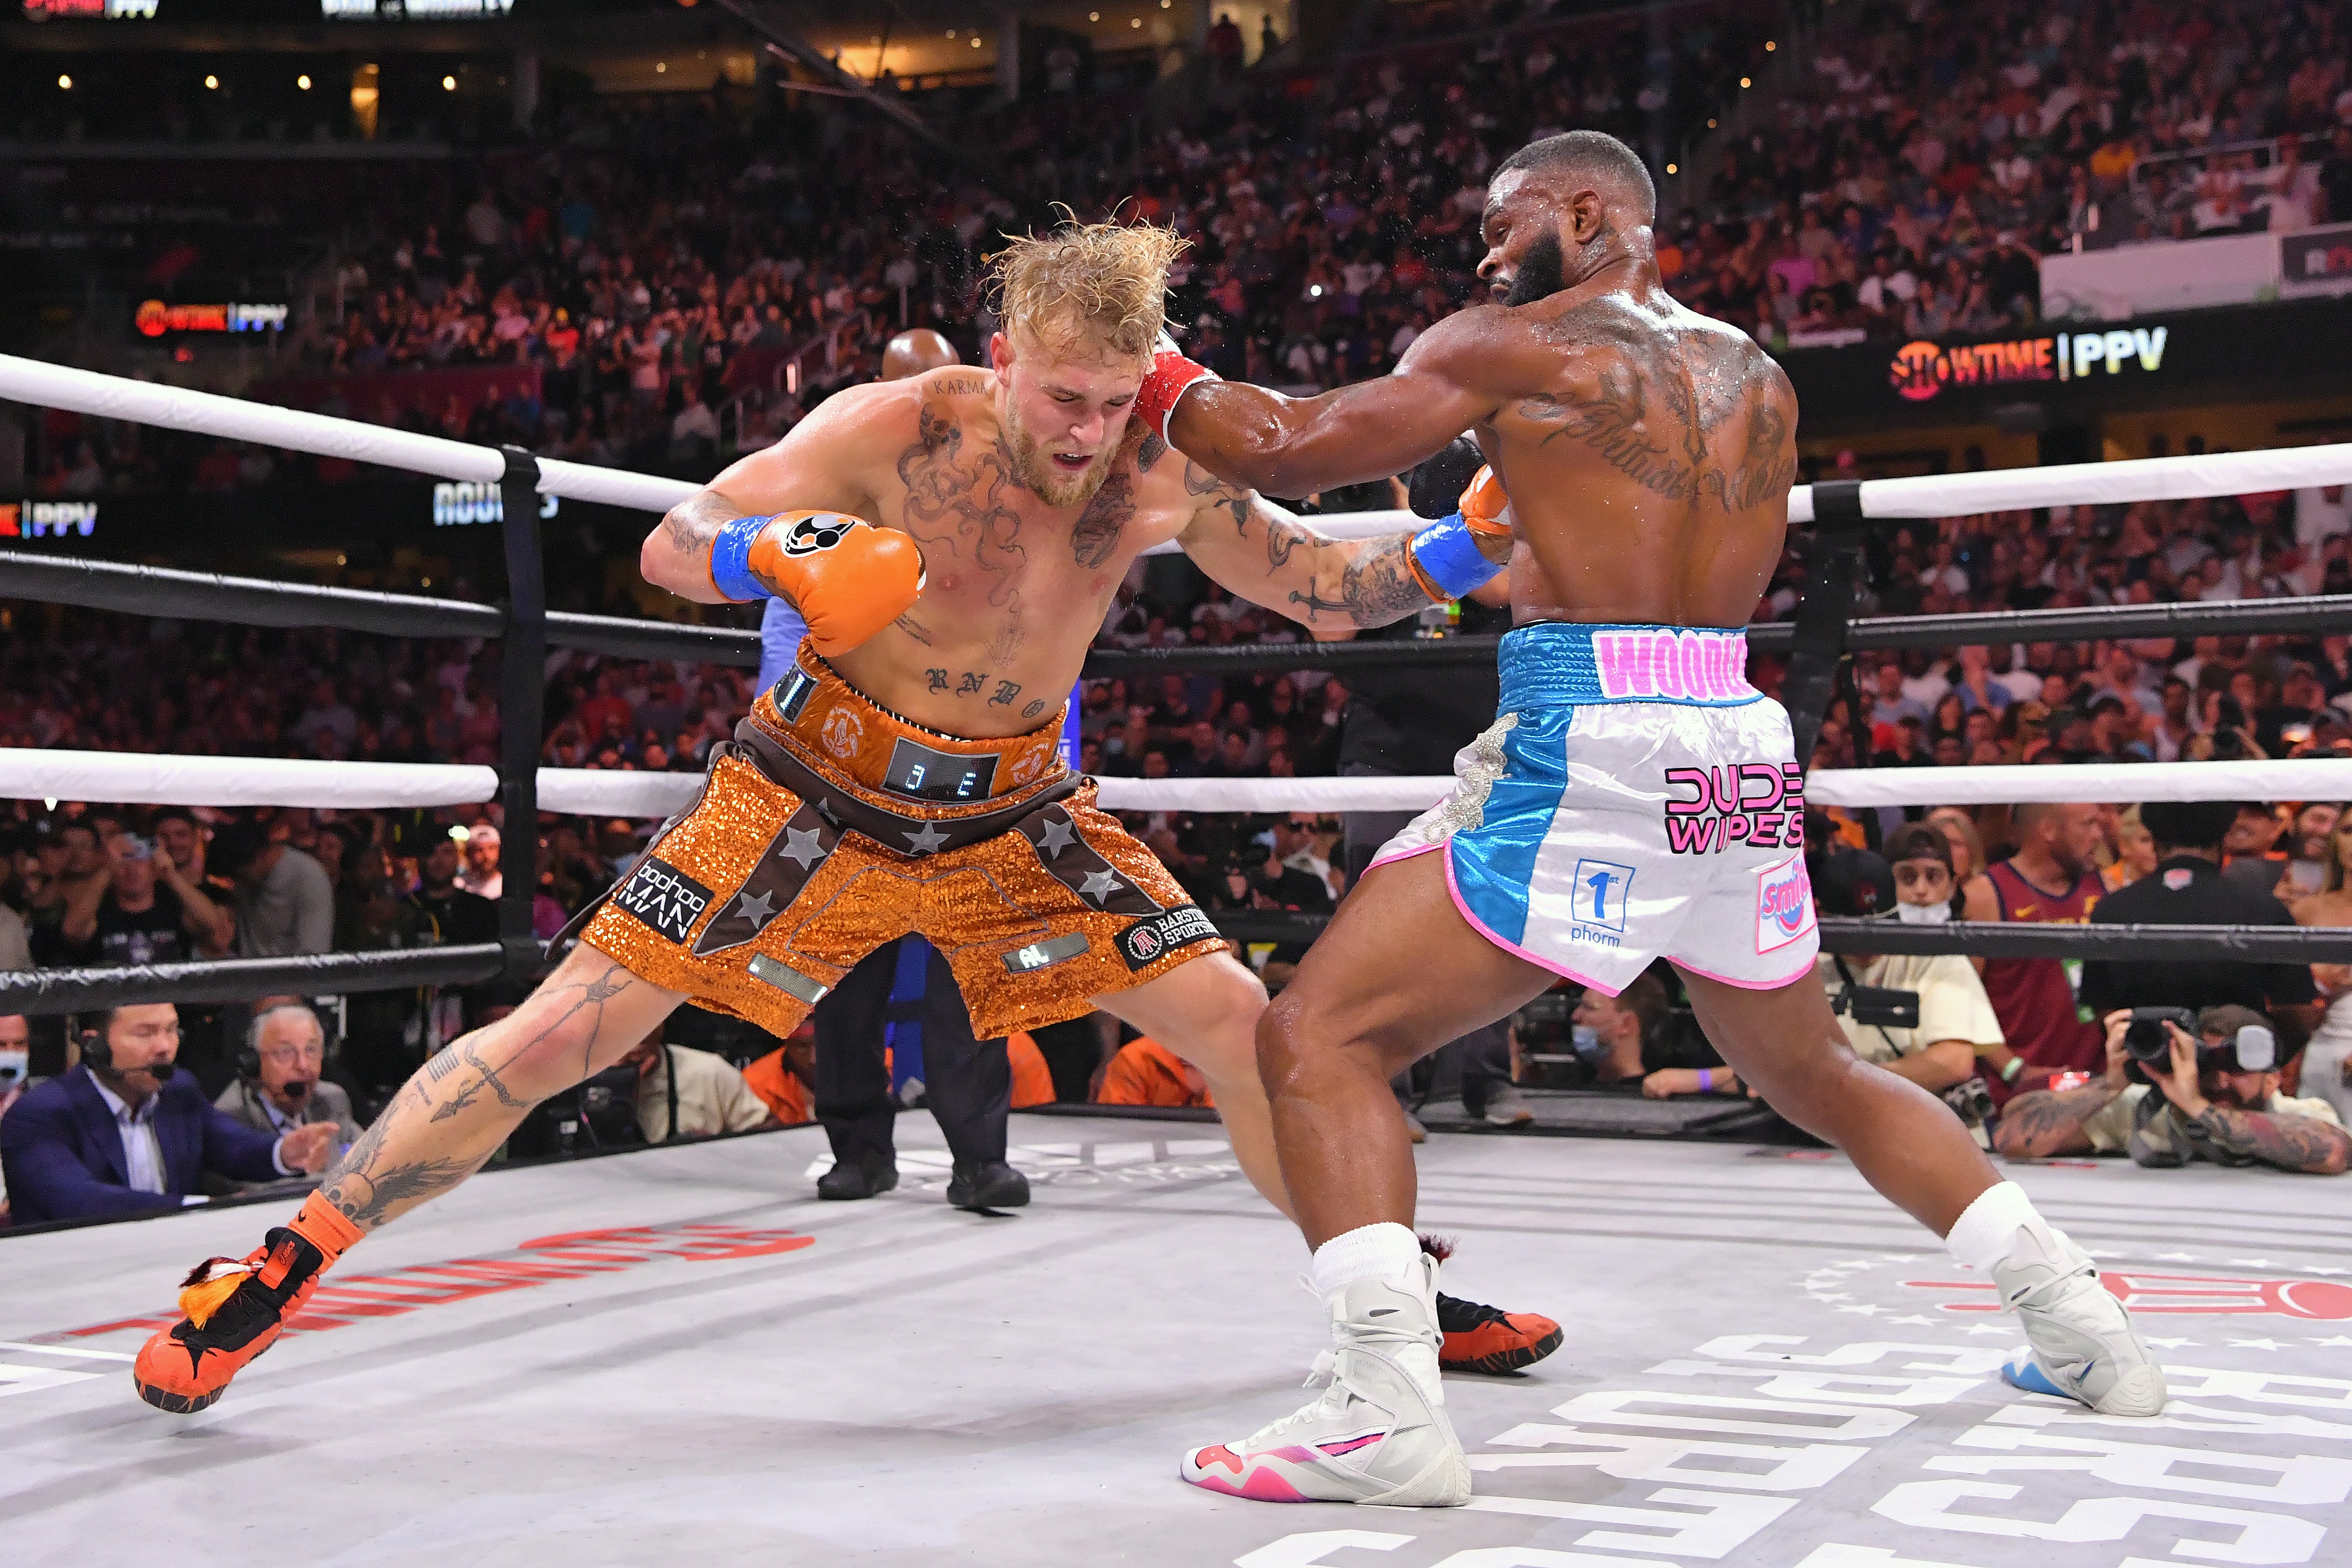 Jake Paul defeated Tyron Woodley earlier this year